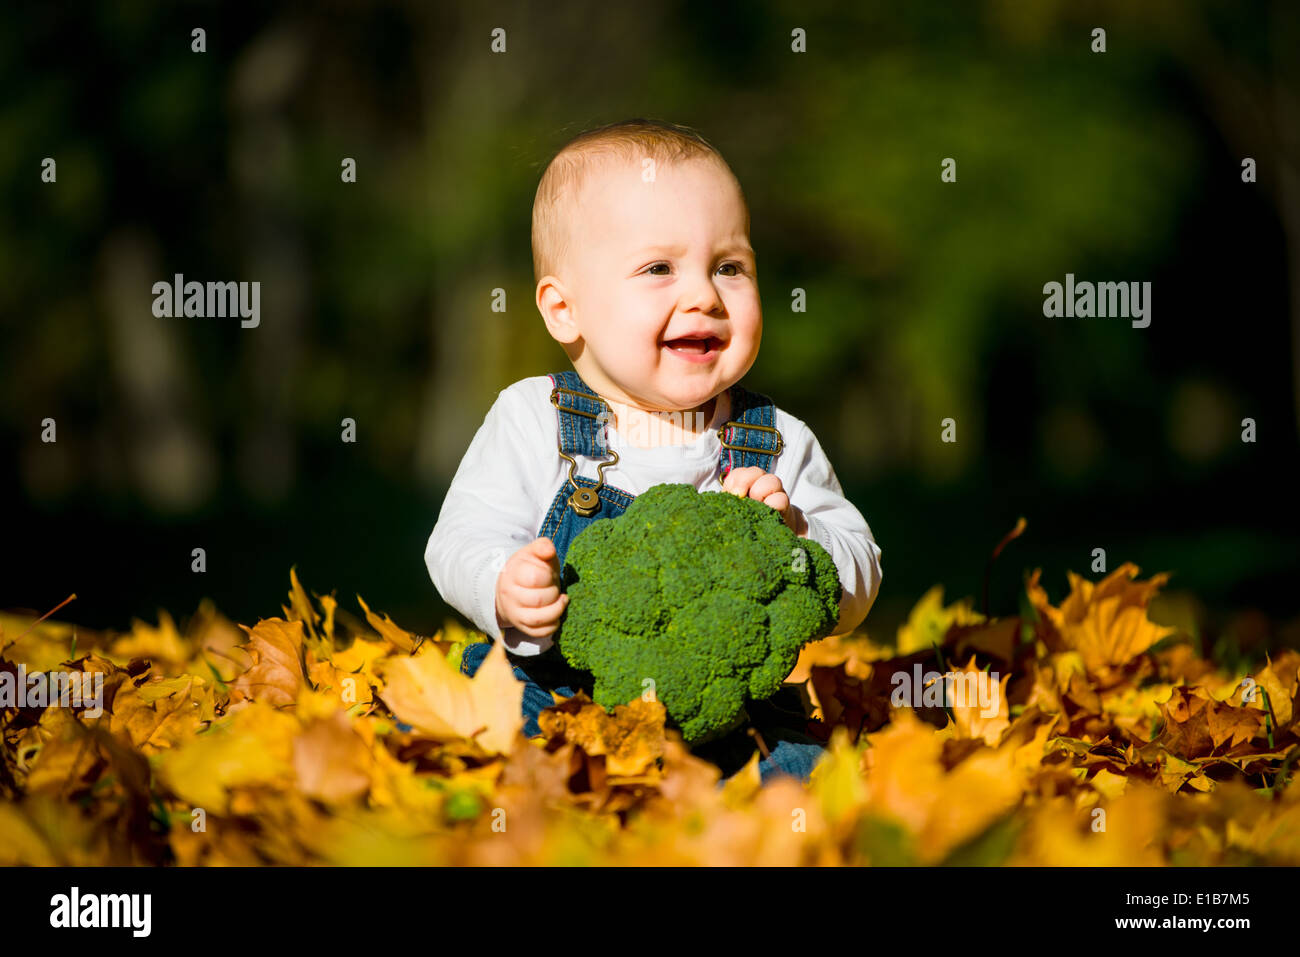 Beautiful baby girl eating food outdoor in nature Stock Photo